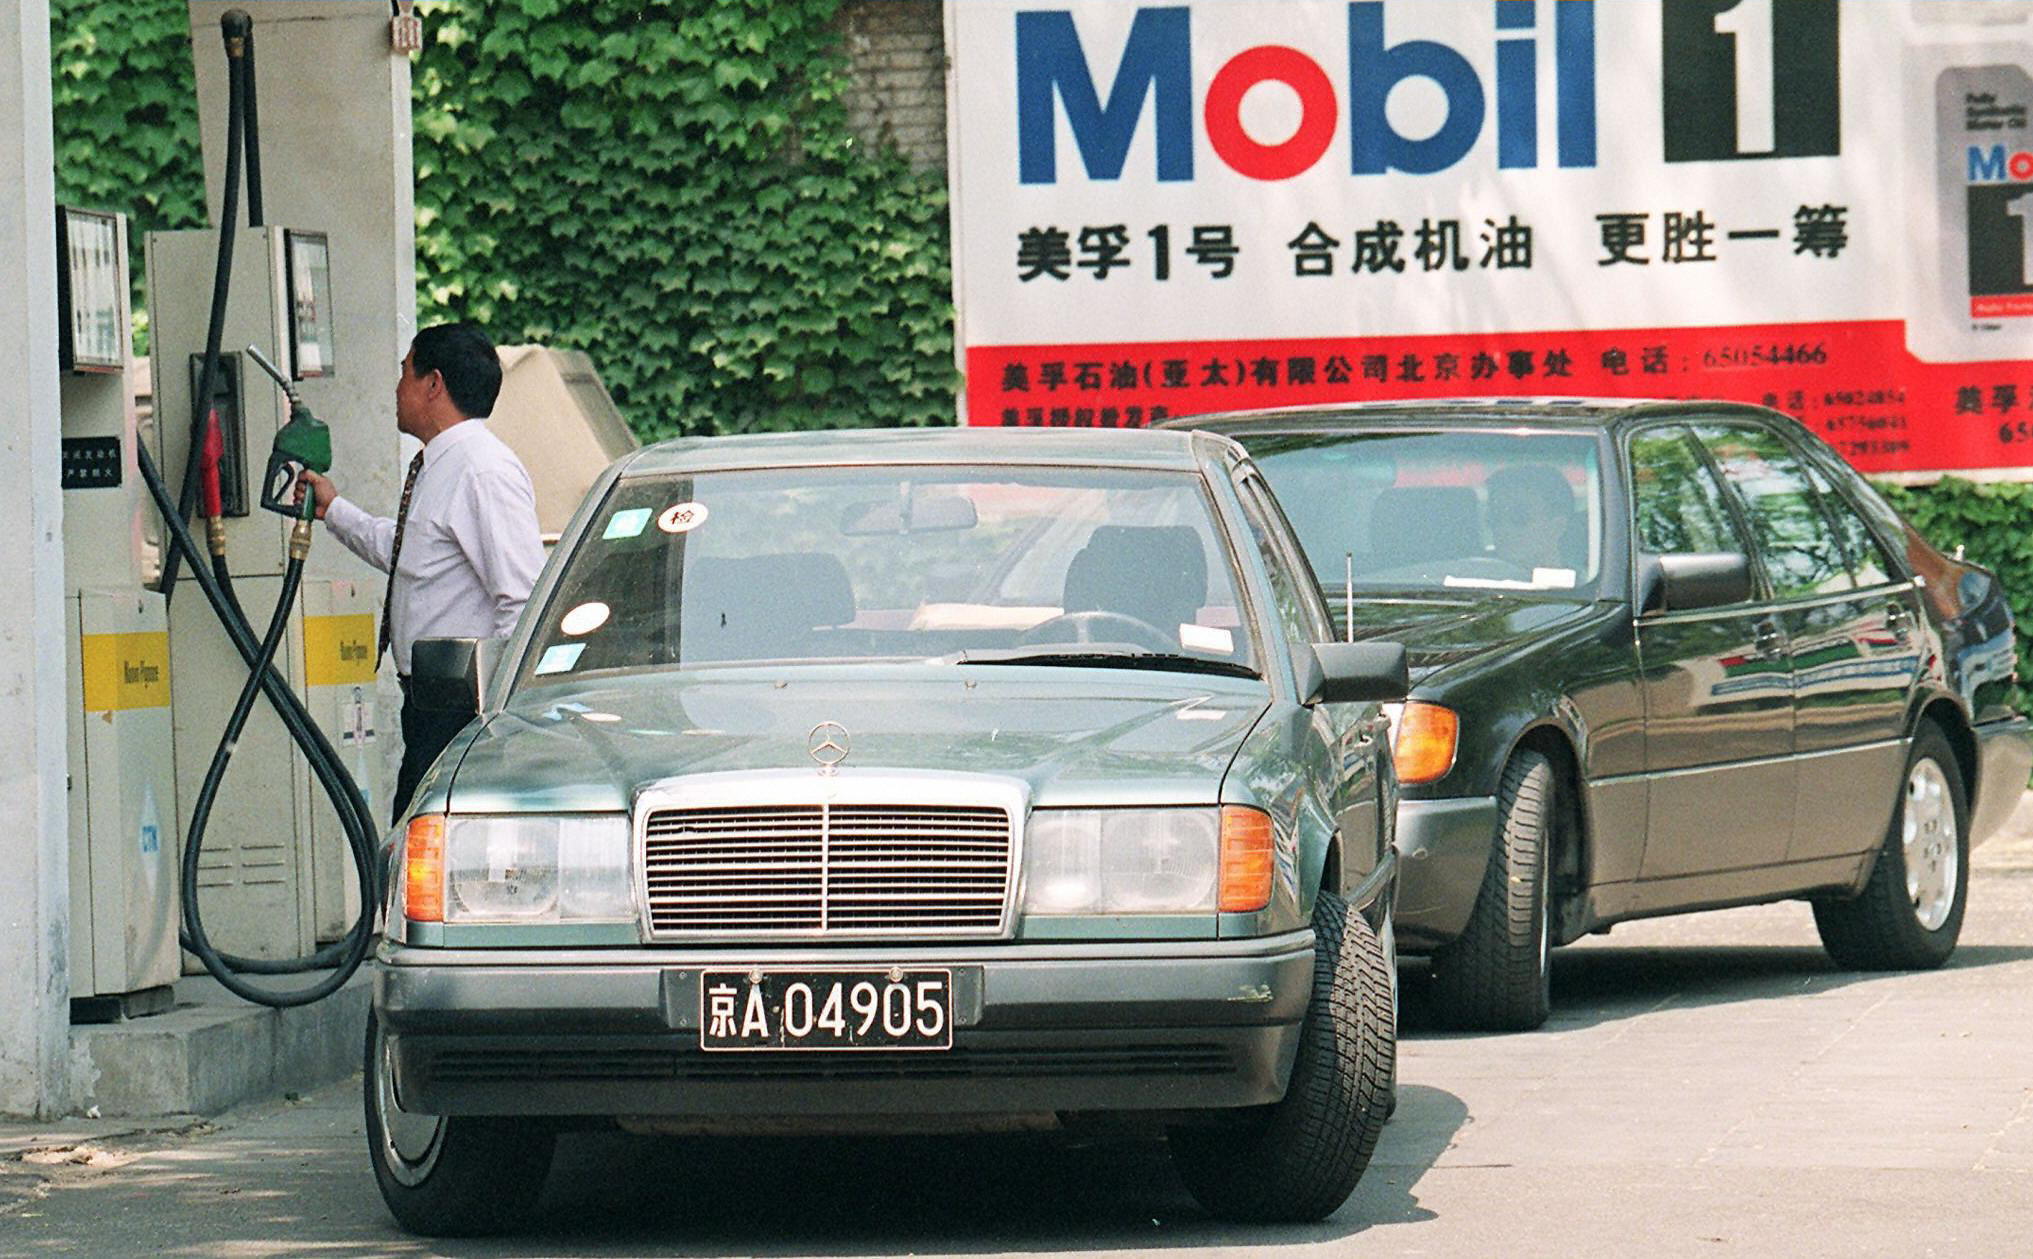 Customers fill up their gas tanks in China